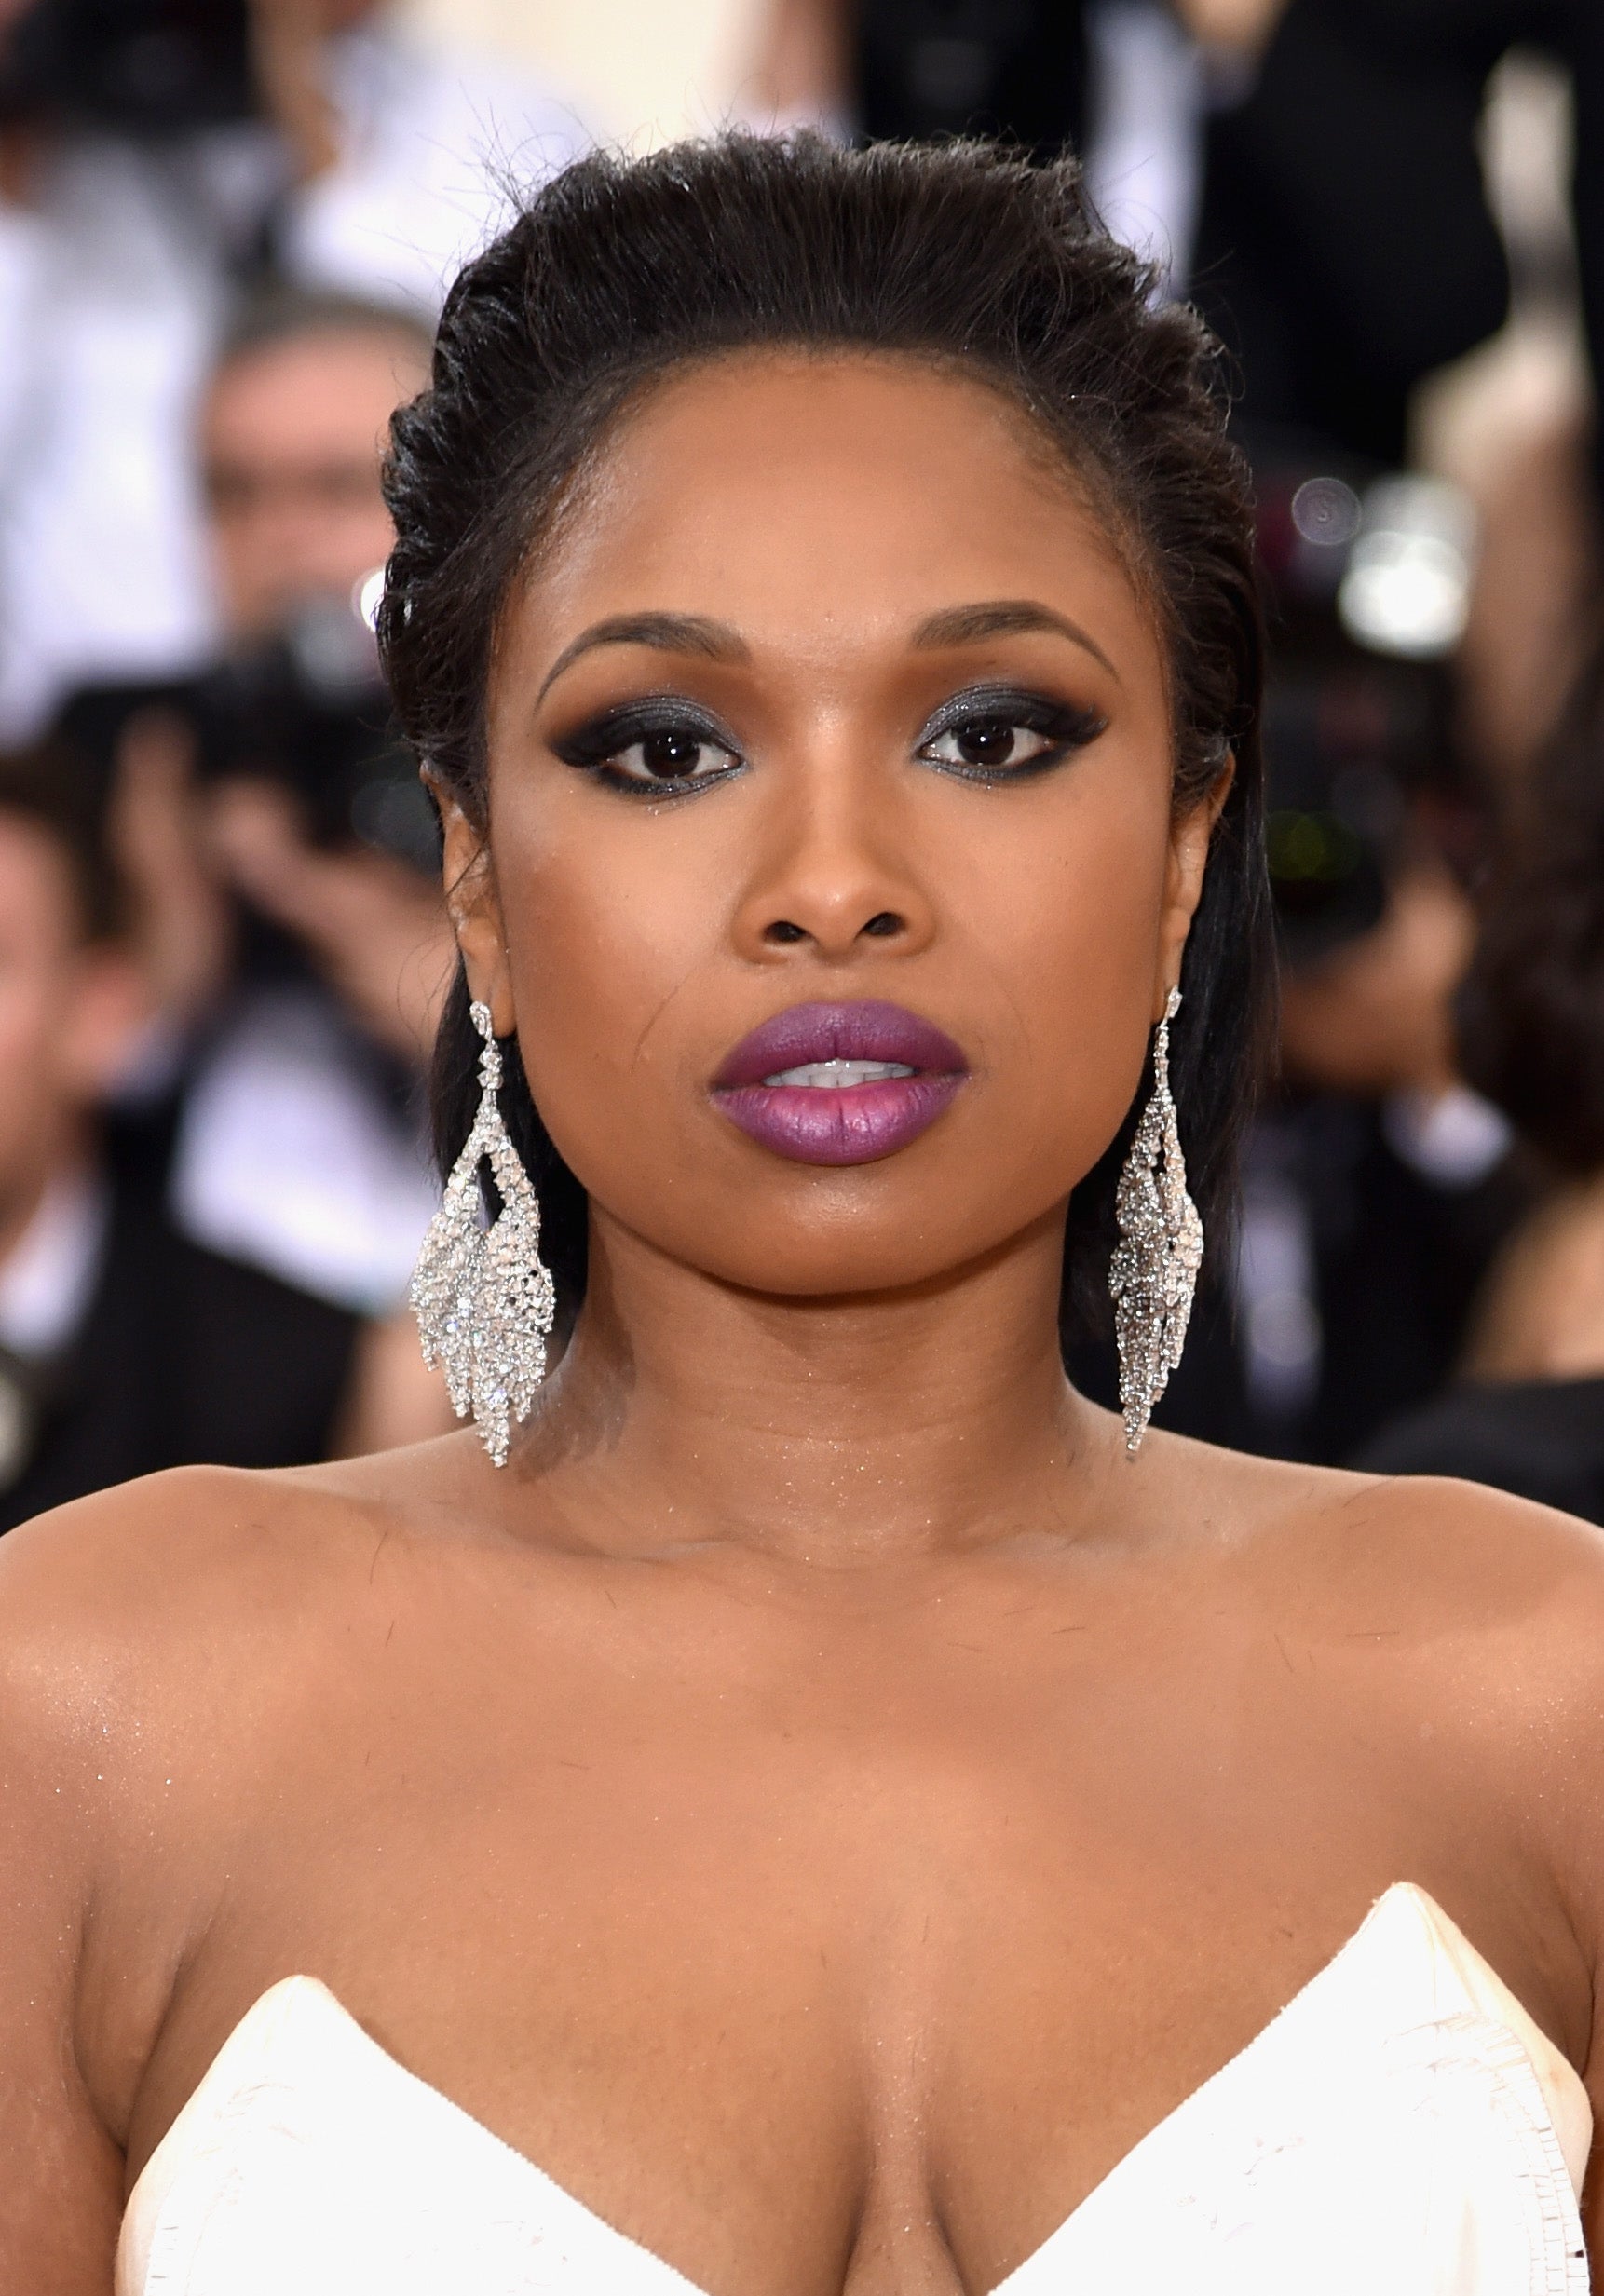 Jennifer Hudson Will Have Full-Circle Moment On 'The Voice'
